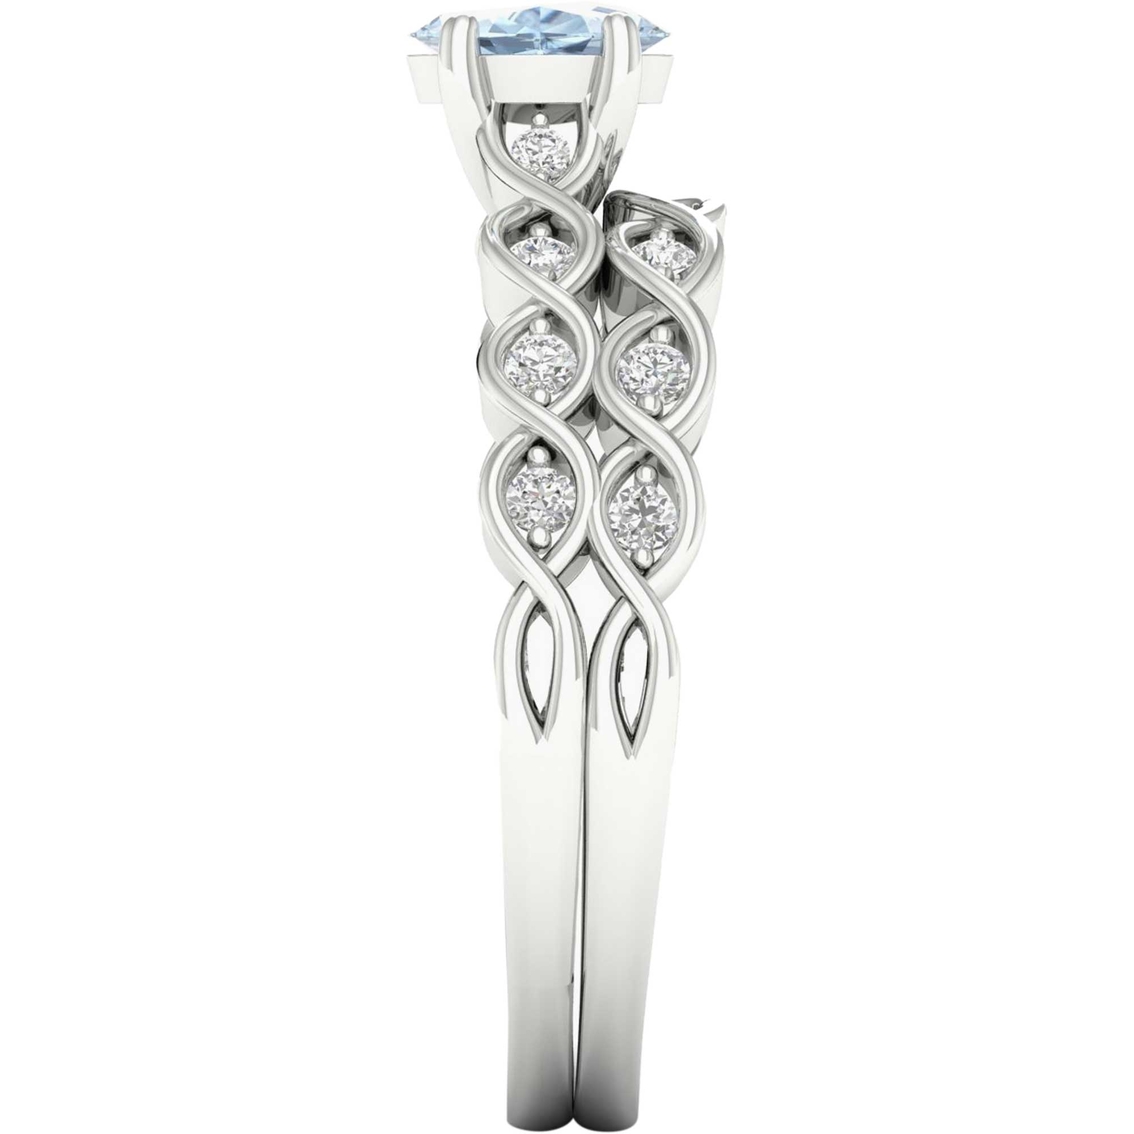 Color Bouquets by Lily 10K White Gold 1/6 CTW Diamond and Aquamarine Bridal Set - Image 3 of 4